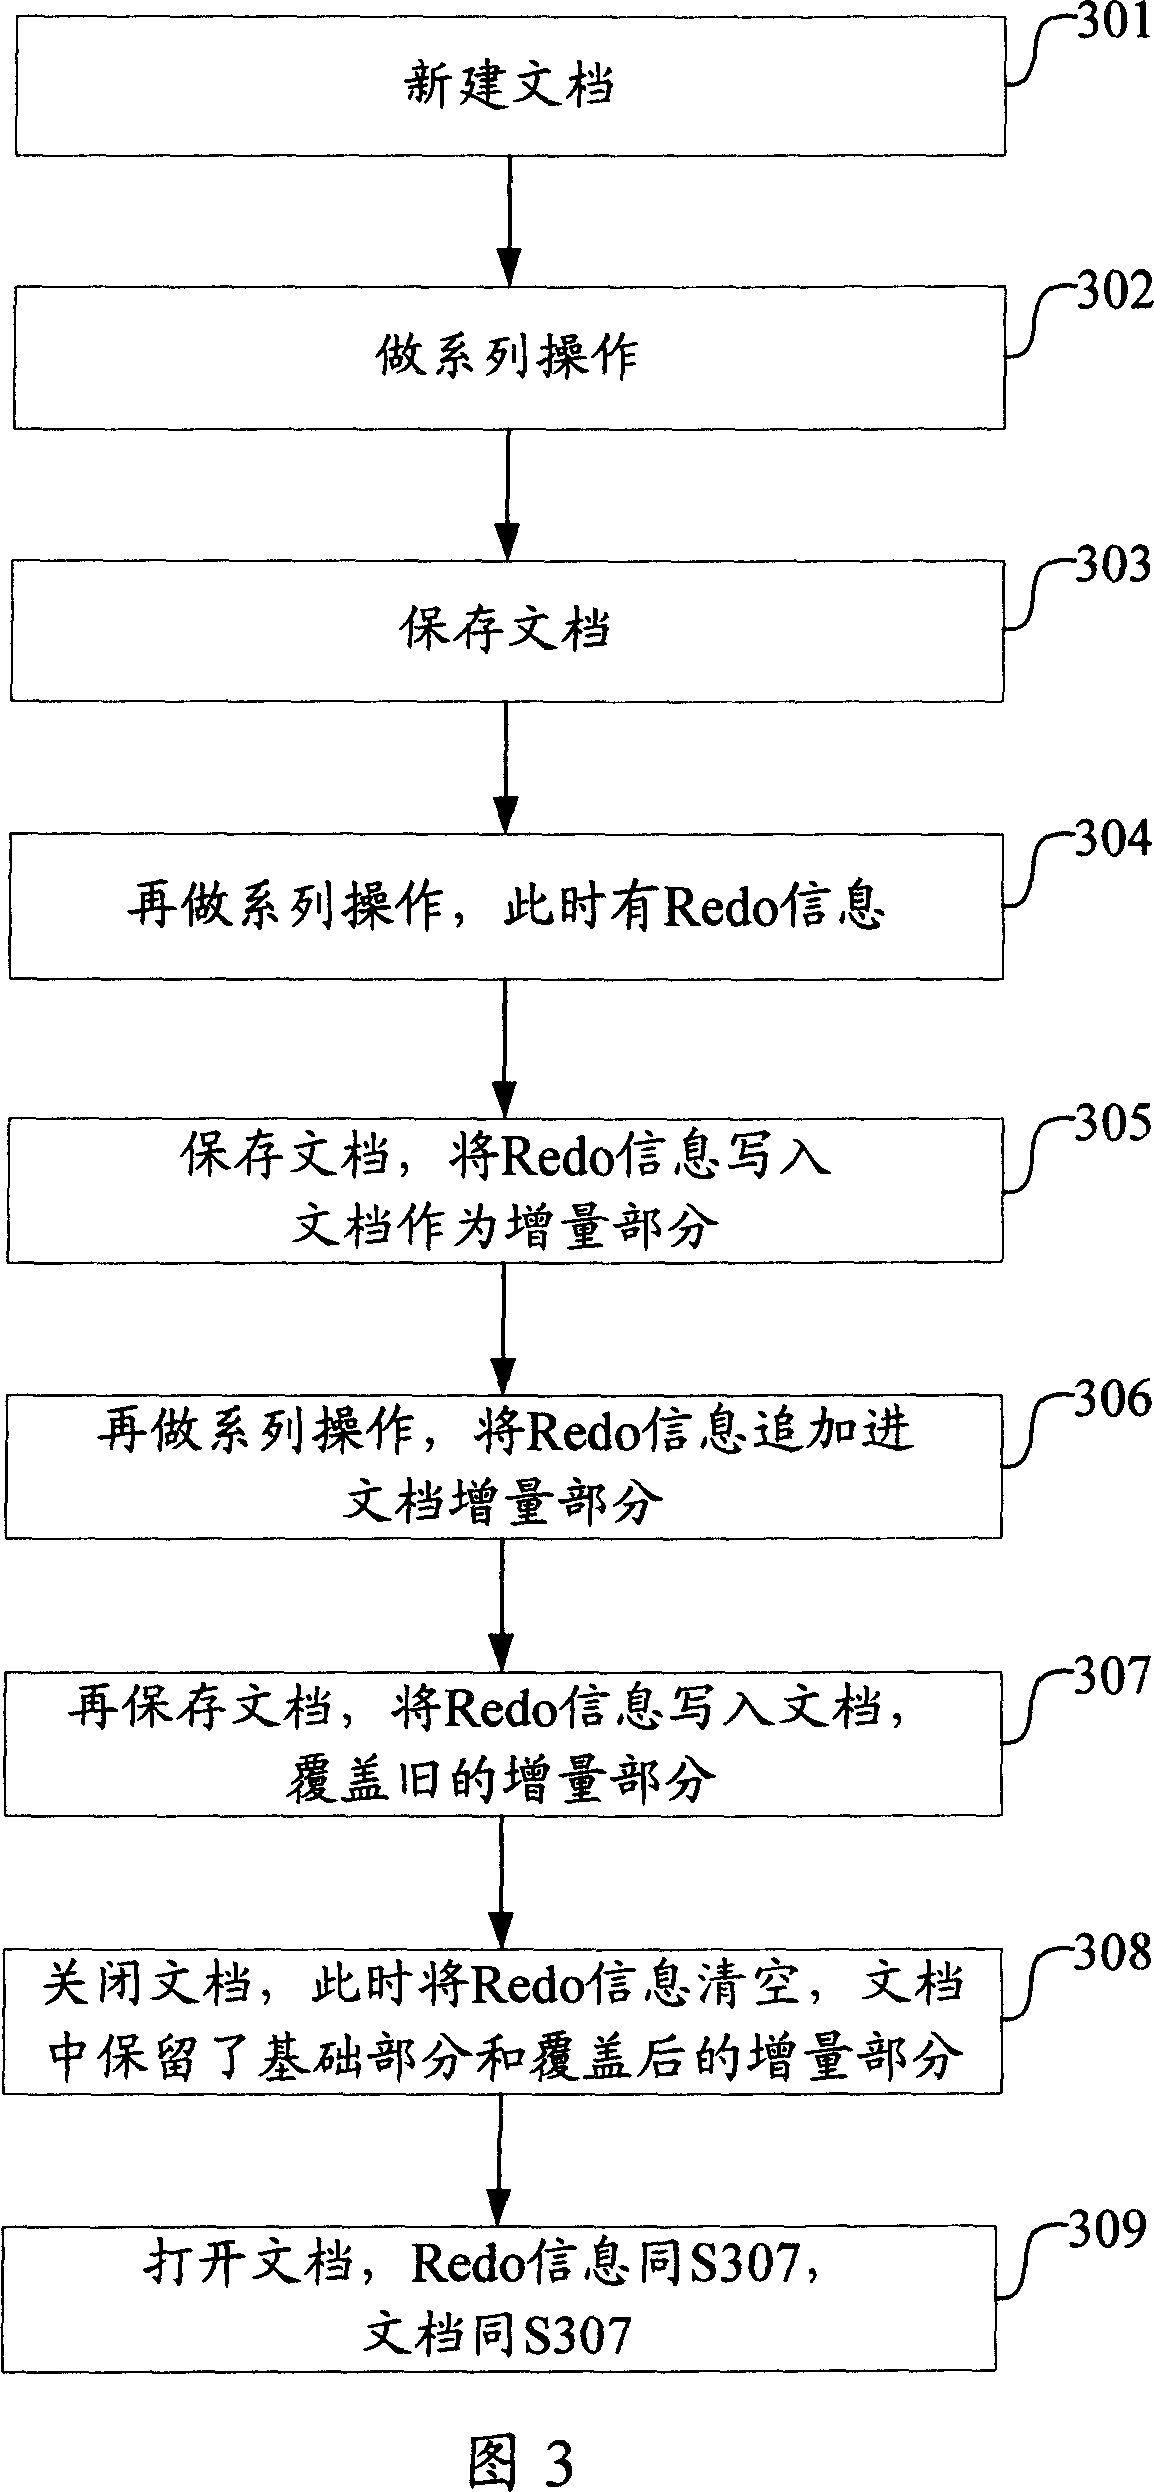 Document storing method and system